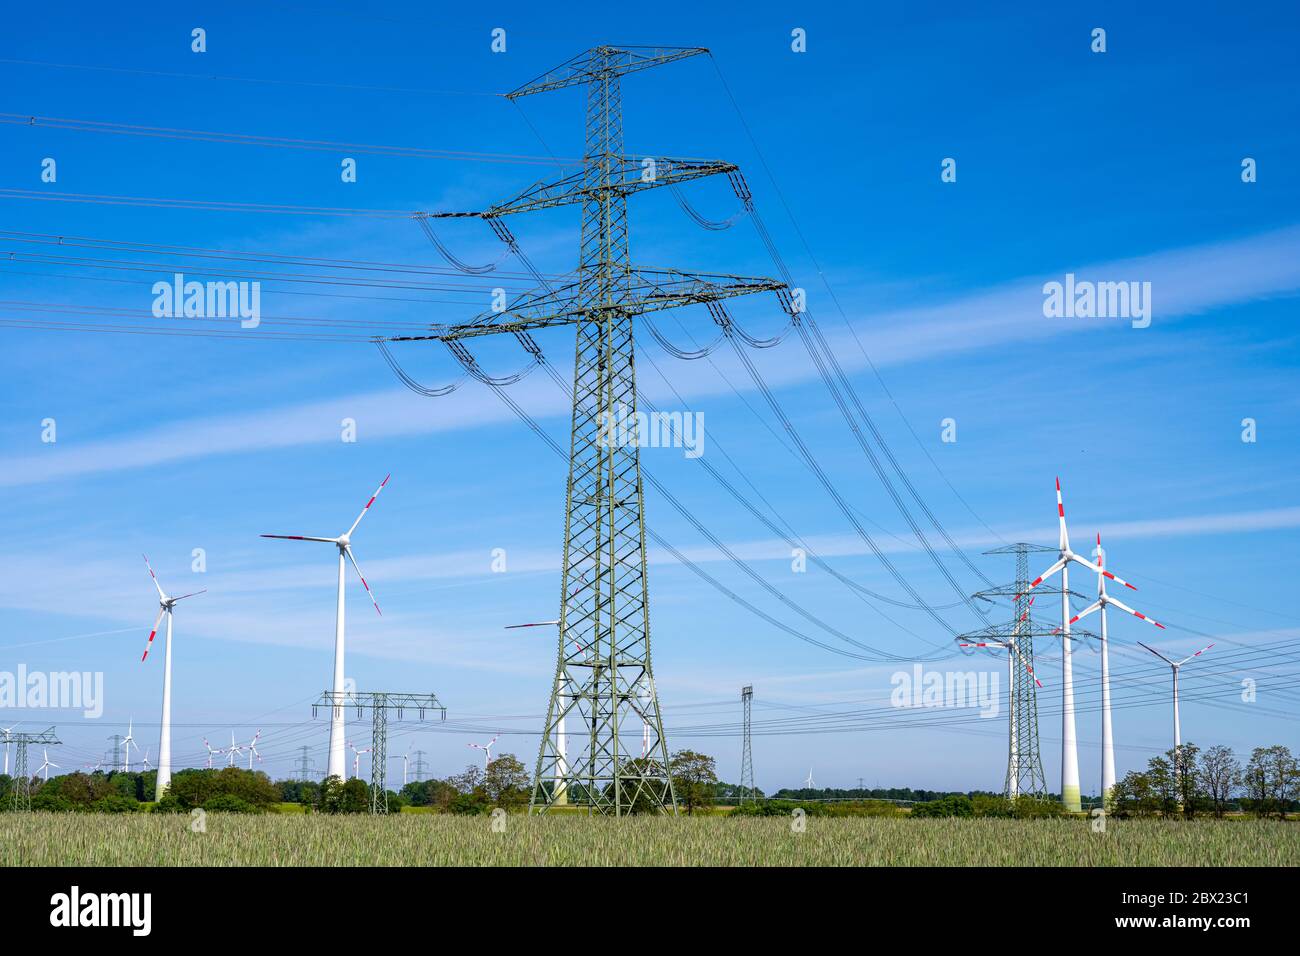 Overhead power lines and wind turbines seen in Germany Stock Photo